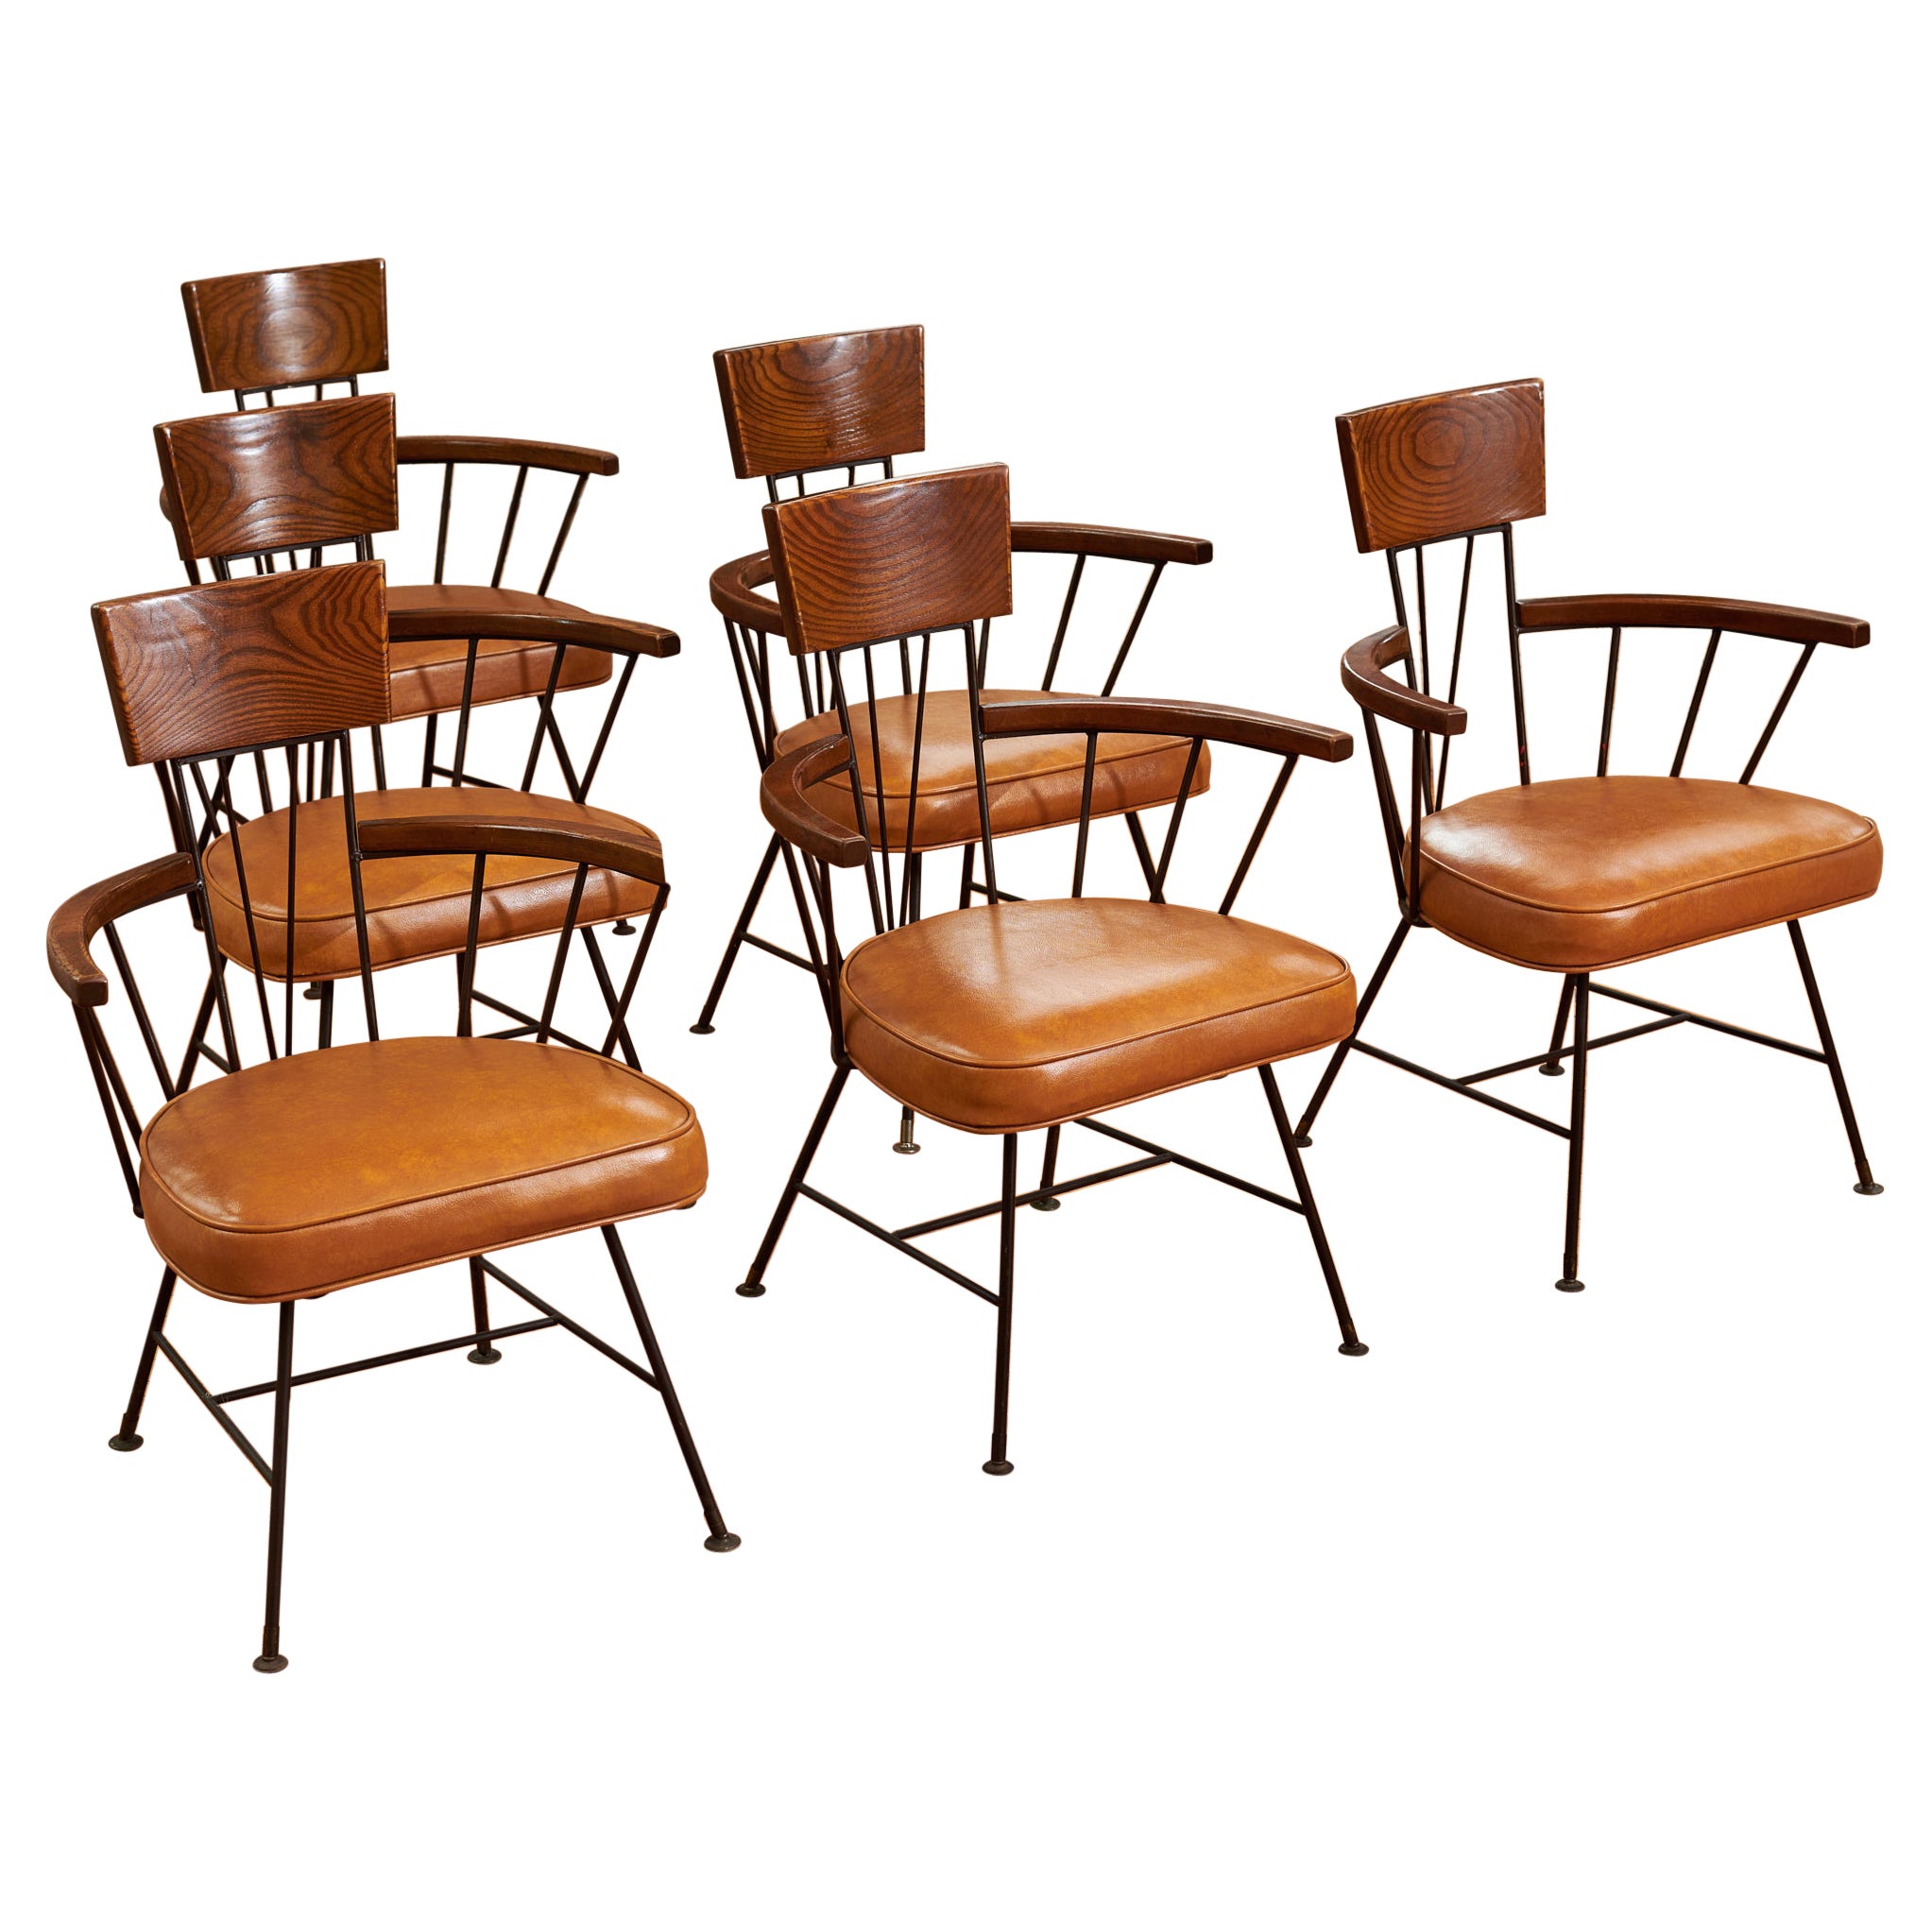 Richard McCarthy for Selrite Captain Dining Chairs With Arms Set of 6